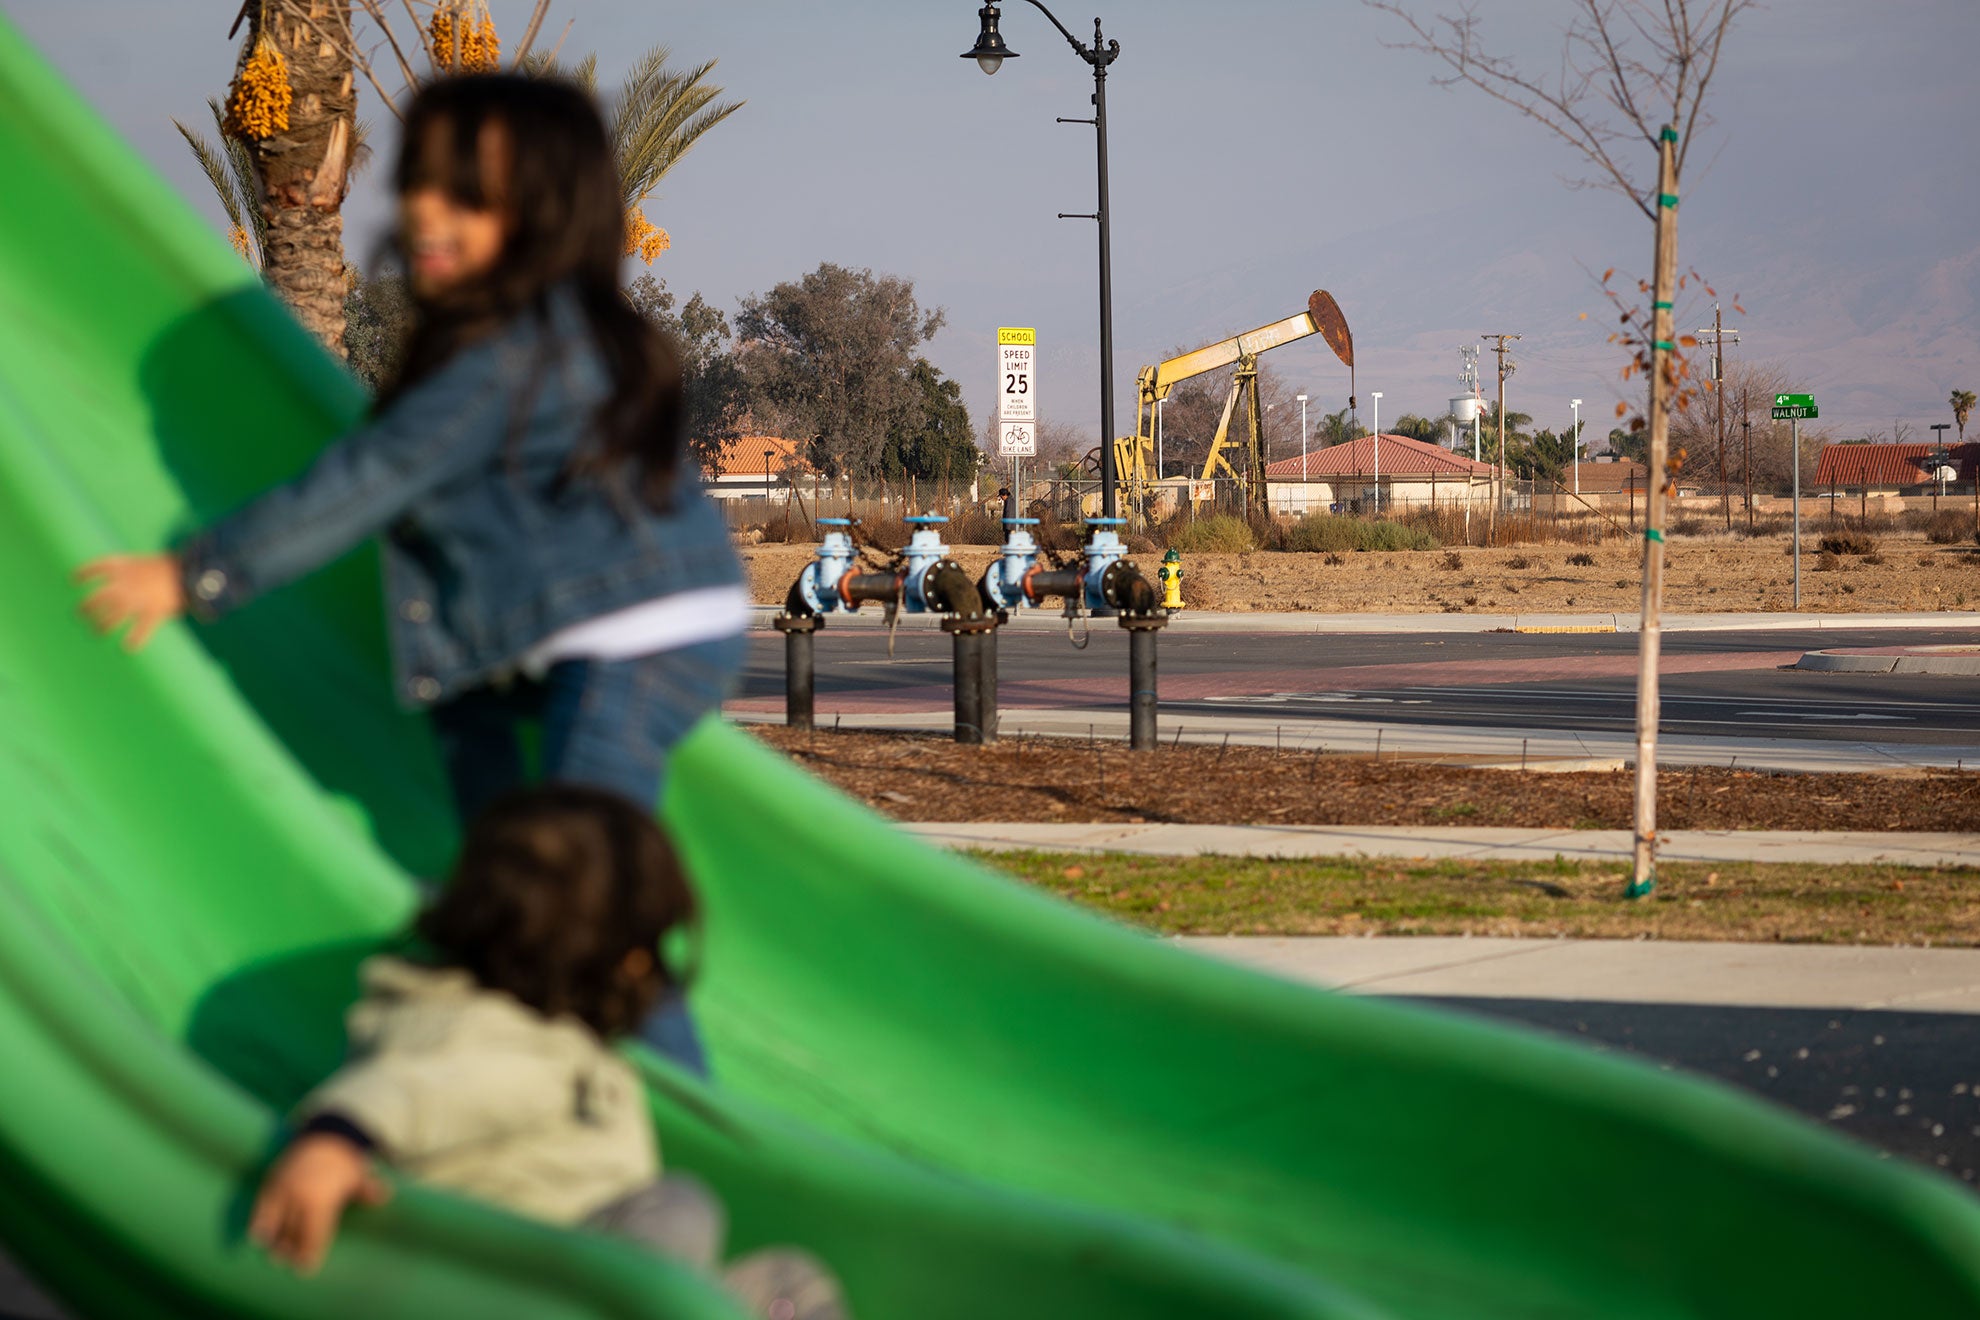 Children play at Arvin's “Garden in the Sun” playground. There are several oil wells near the park.